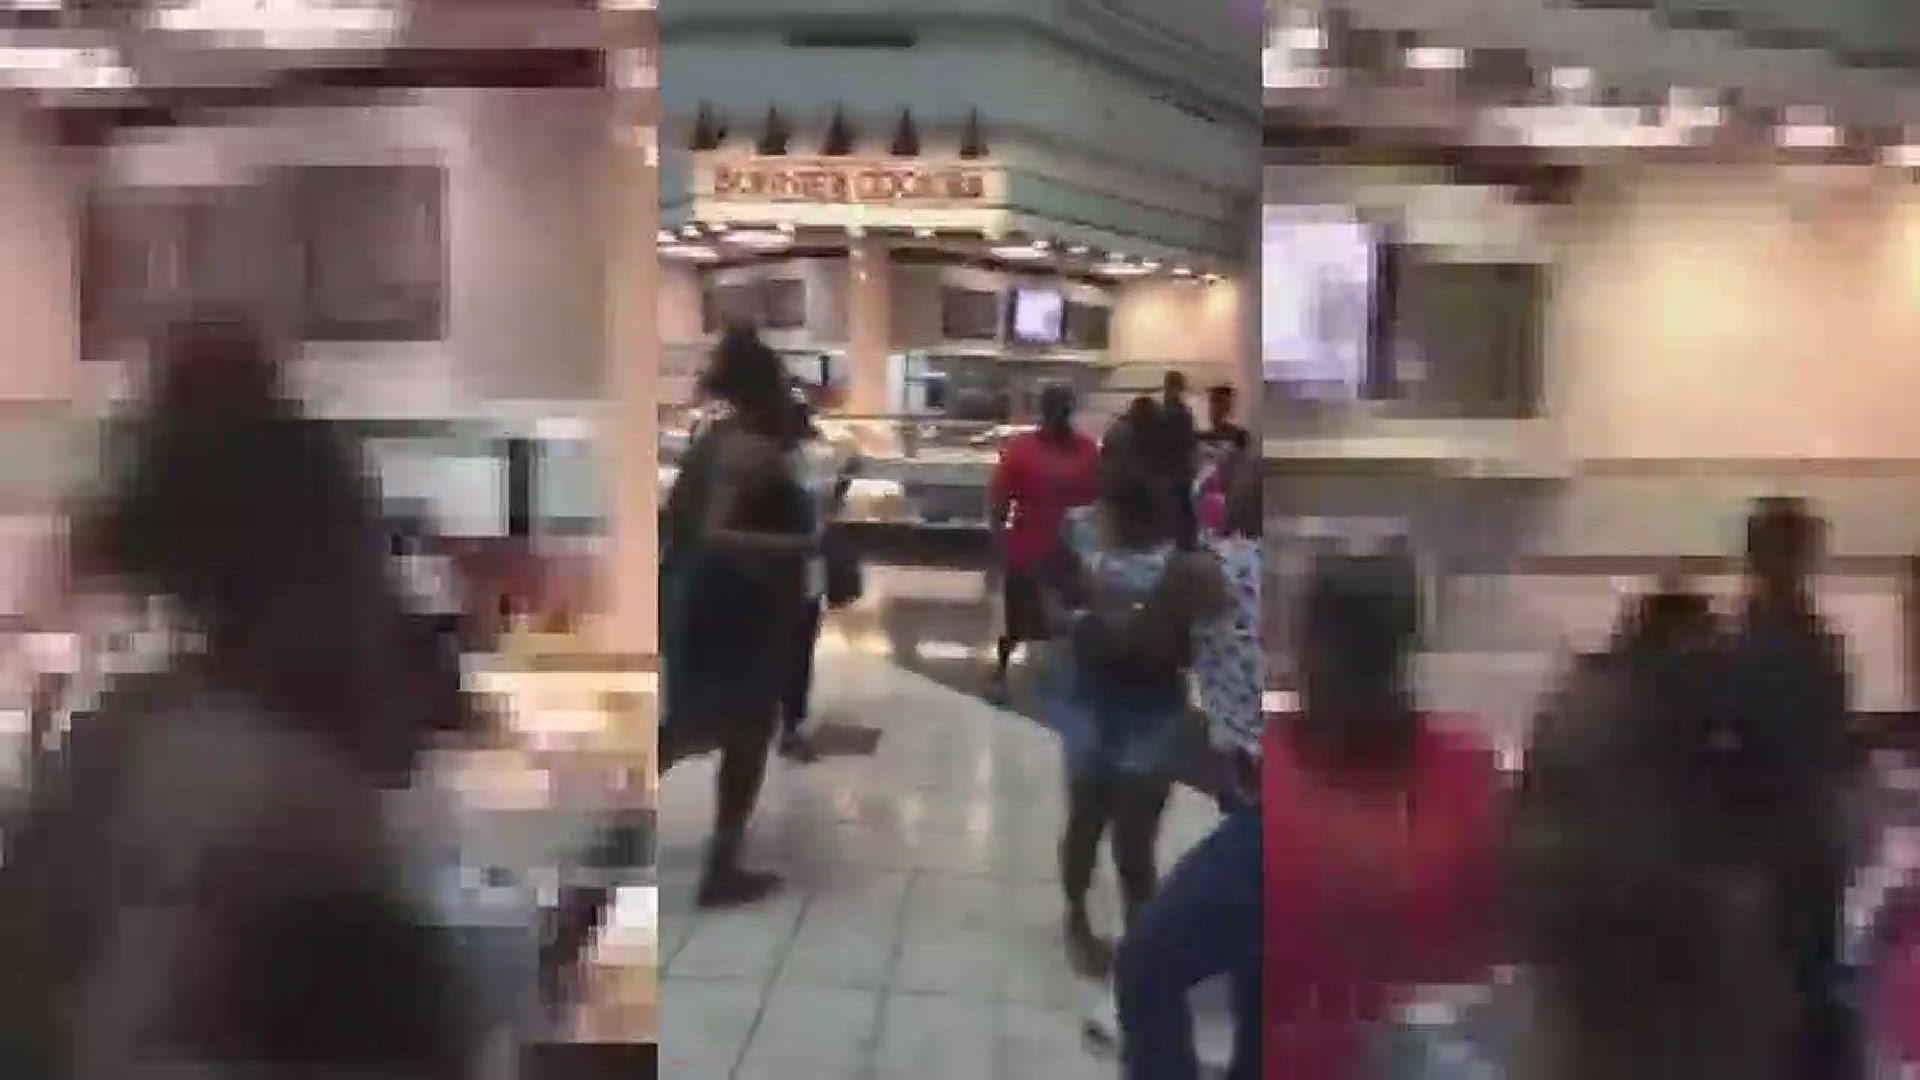 A person was cut with a weapon during a fight Tuesday night at the Galleria Mall in Centerville. (Video submitted to 13WMAZ)